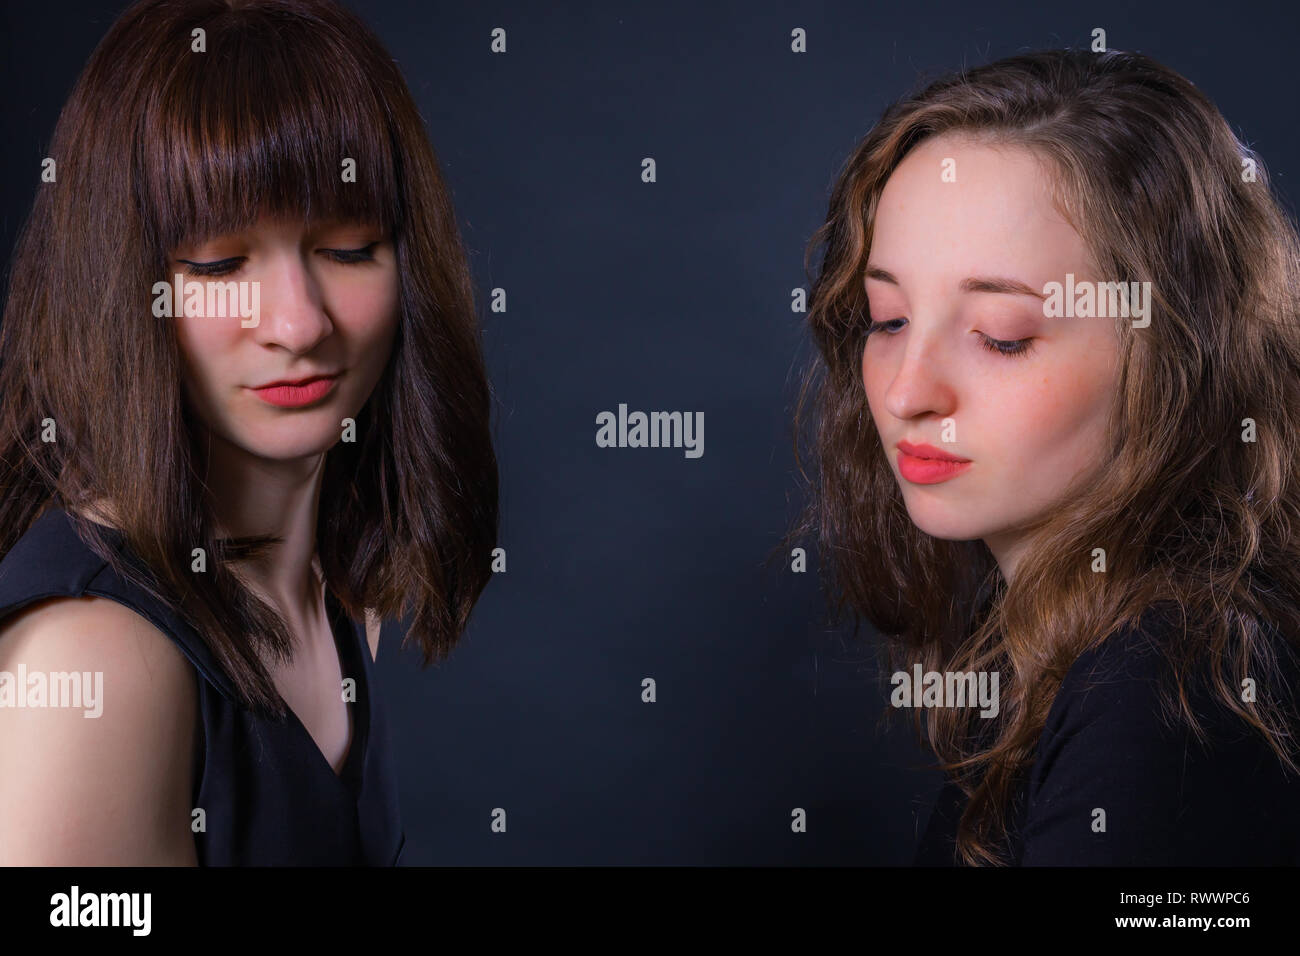 Group portrait of two girls on a dark background Stock Photo